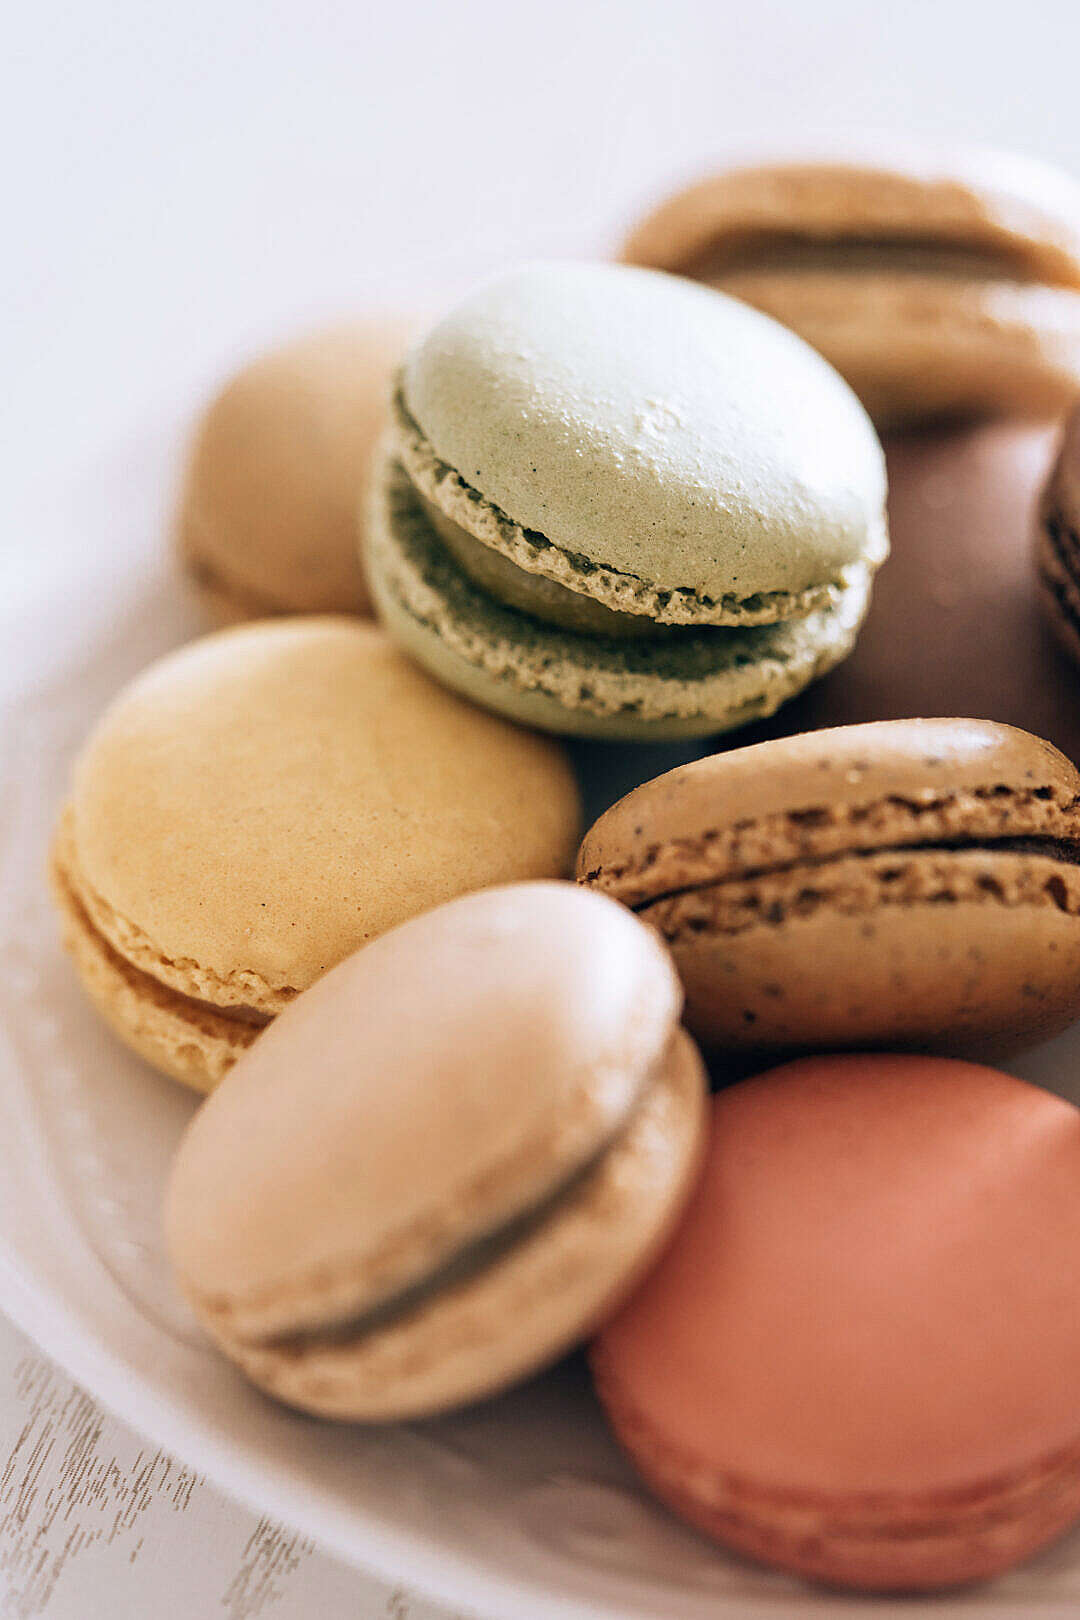 Download Delicious Homemade Macarons on a Plate FREE Stock Photo